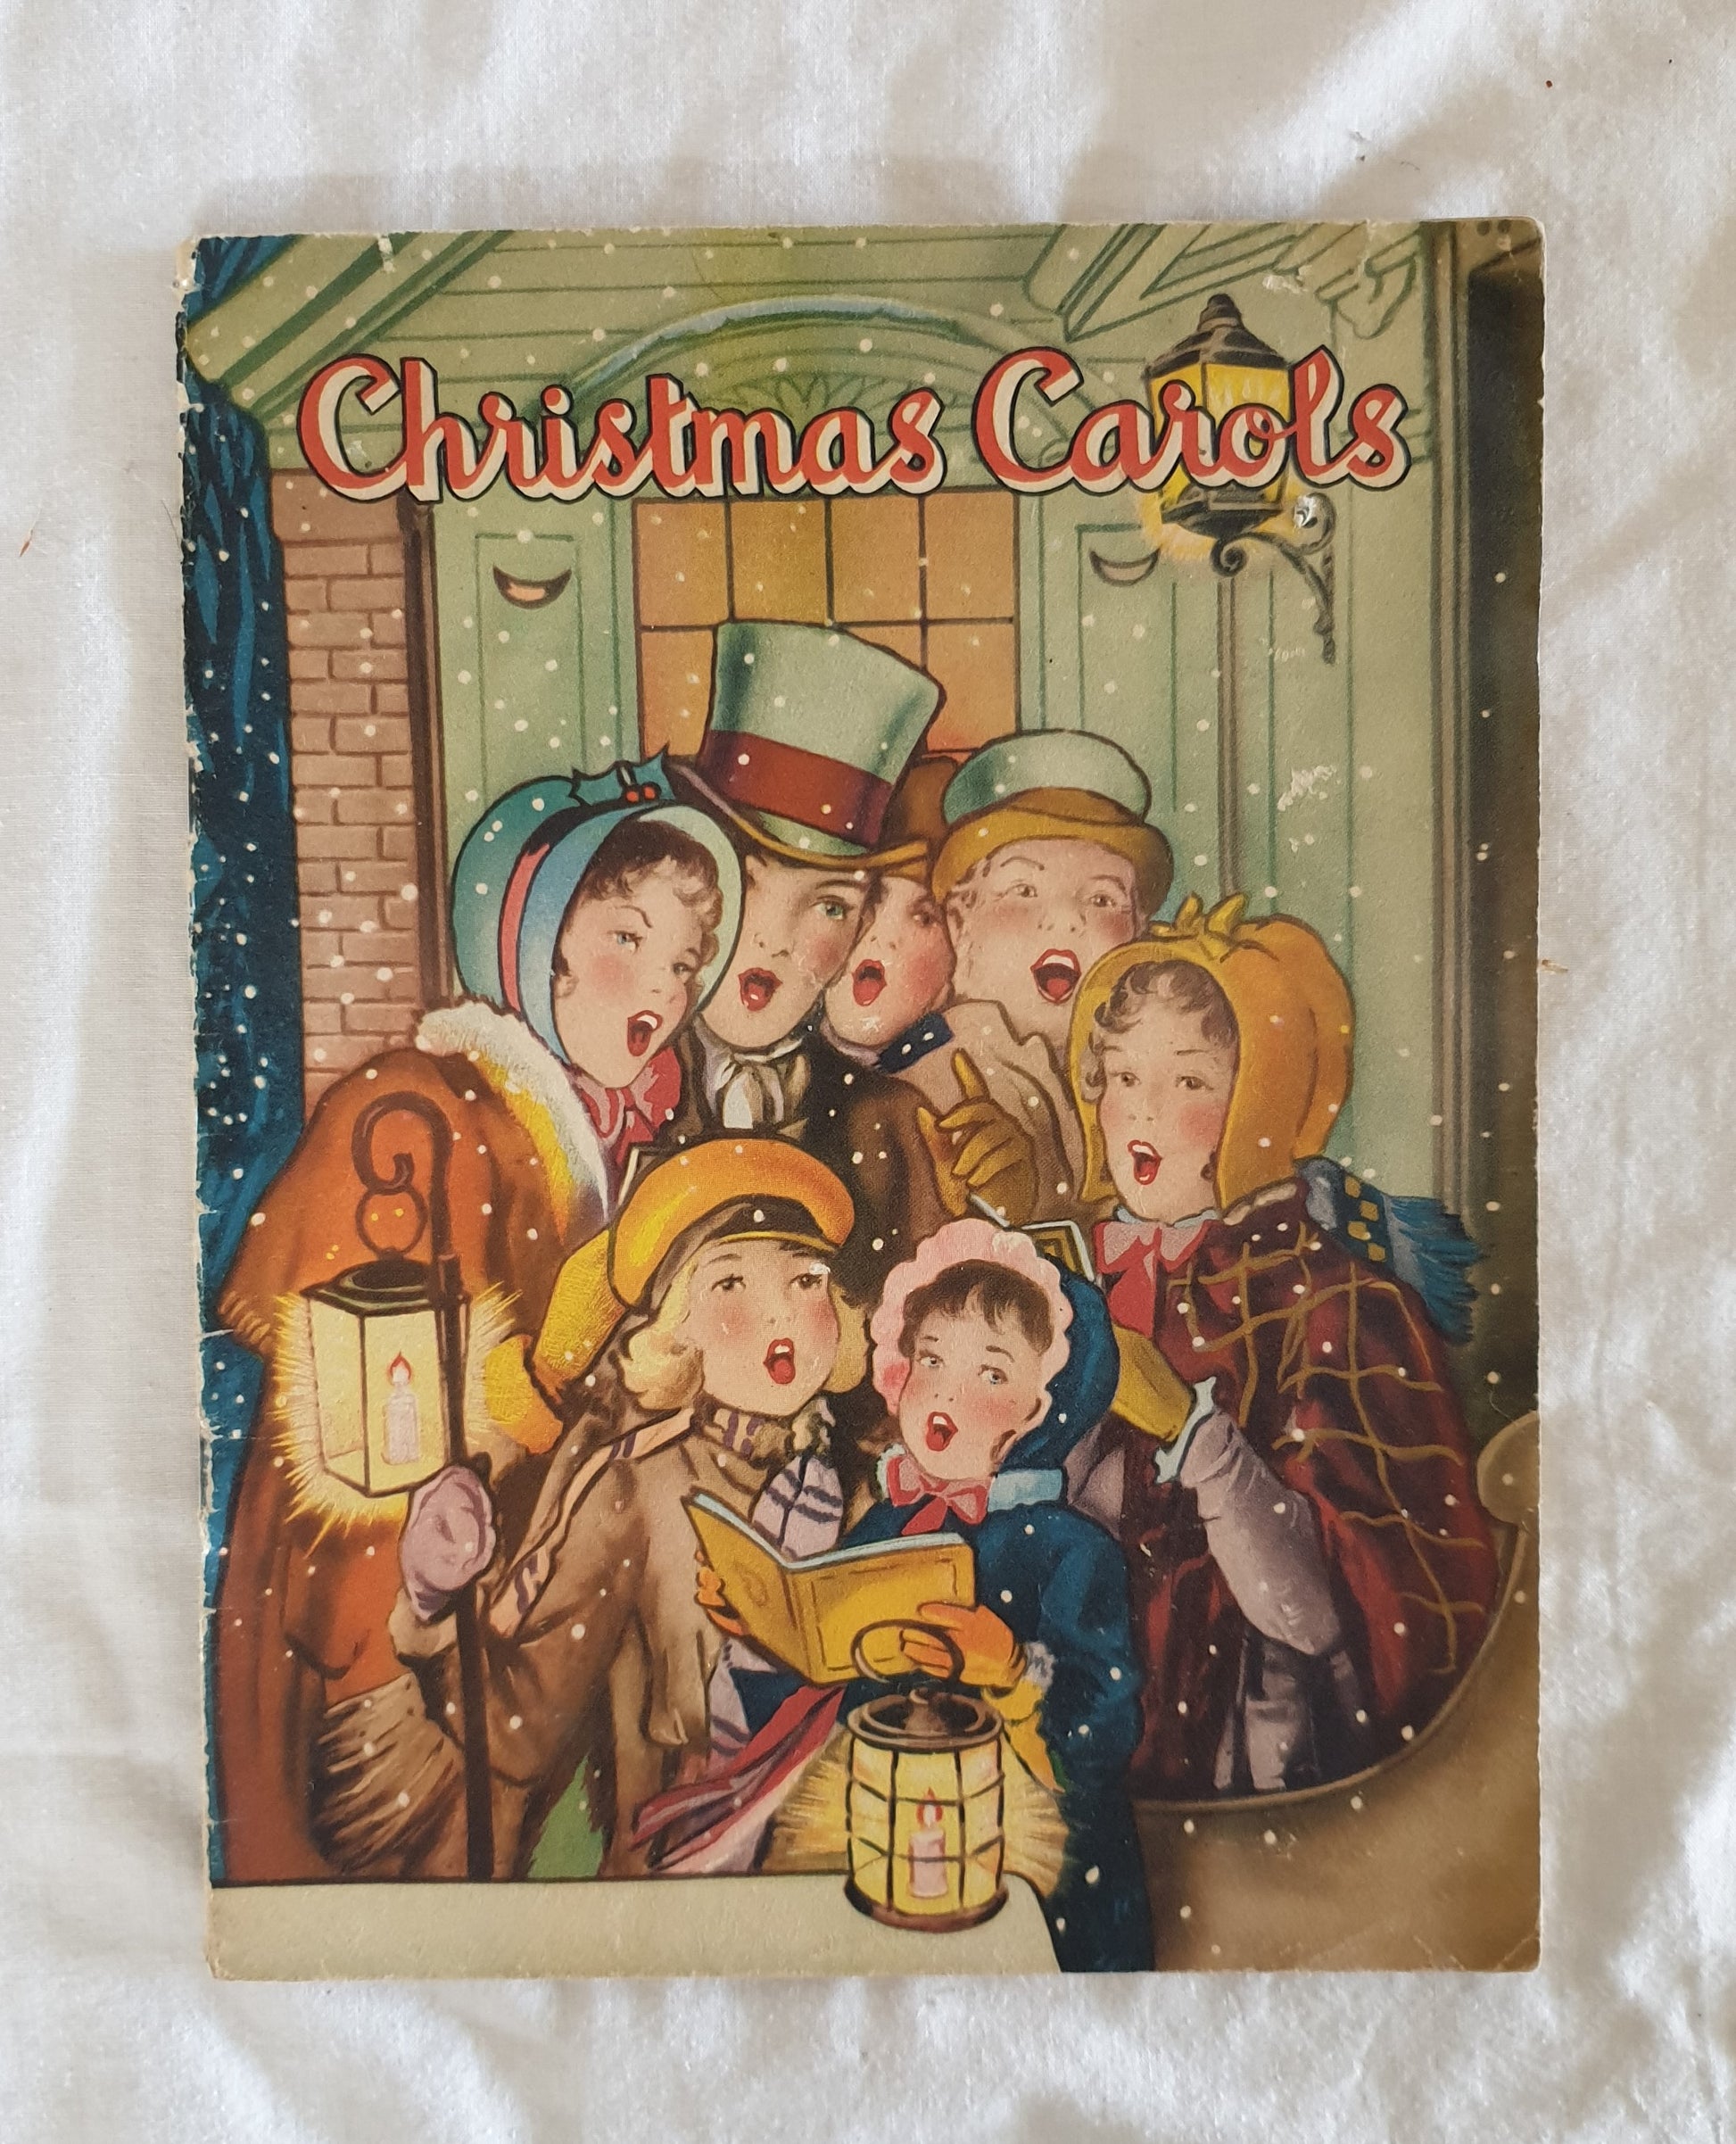 Christmas Carols  Selected and Arranged by Karl Schulte  with illustrations by F. D. Lohman